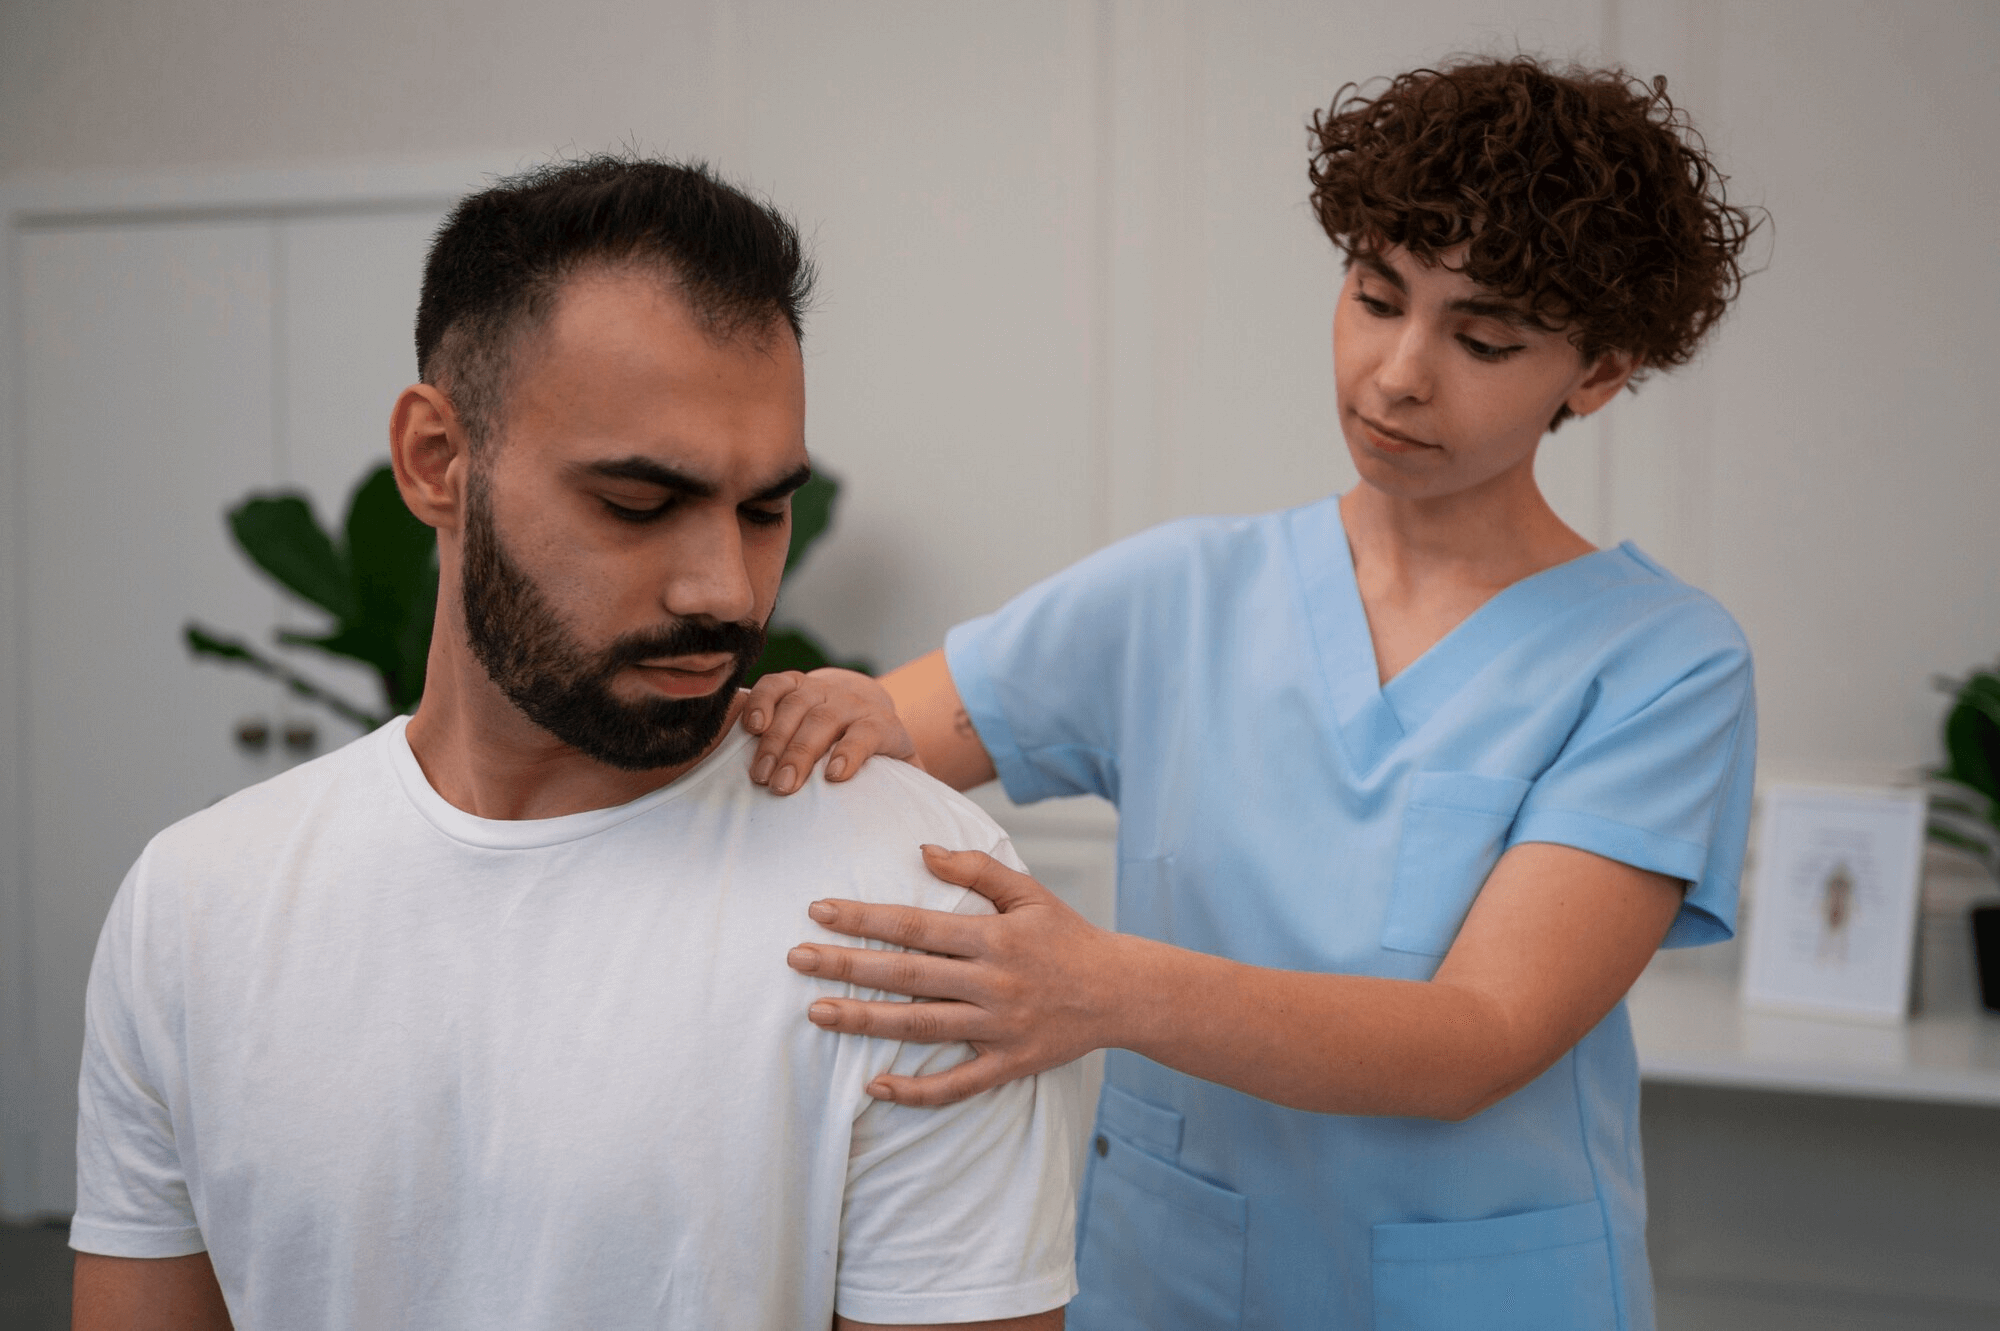 A healthcare professional in blue scrubs examines a seated man's shoulder, possibly addressing back pain from a recent car accident.